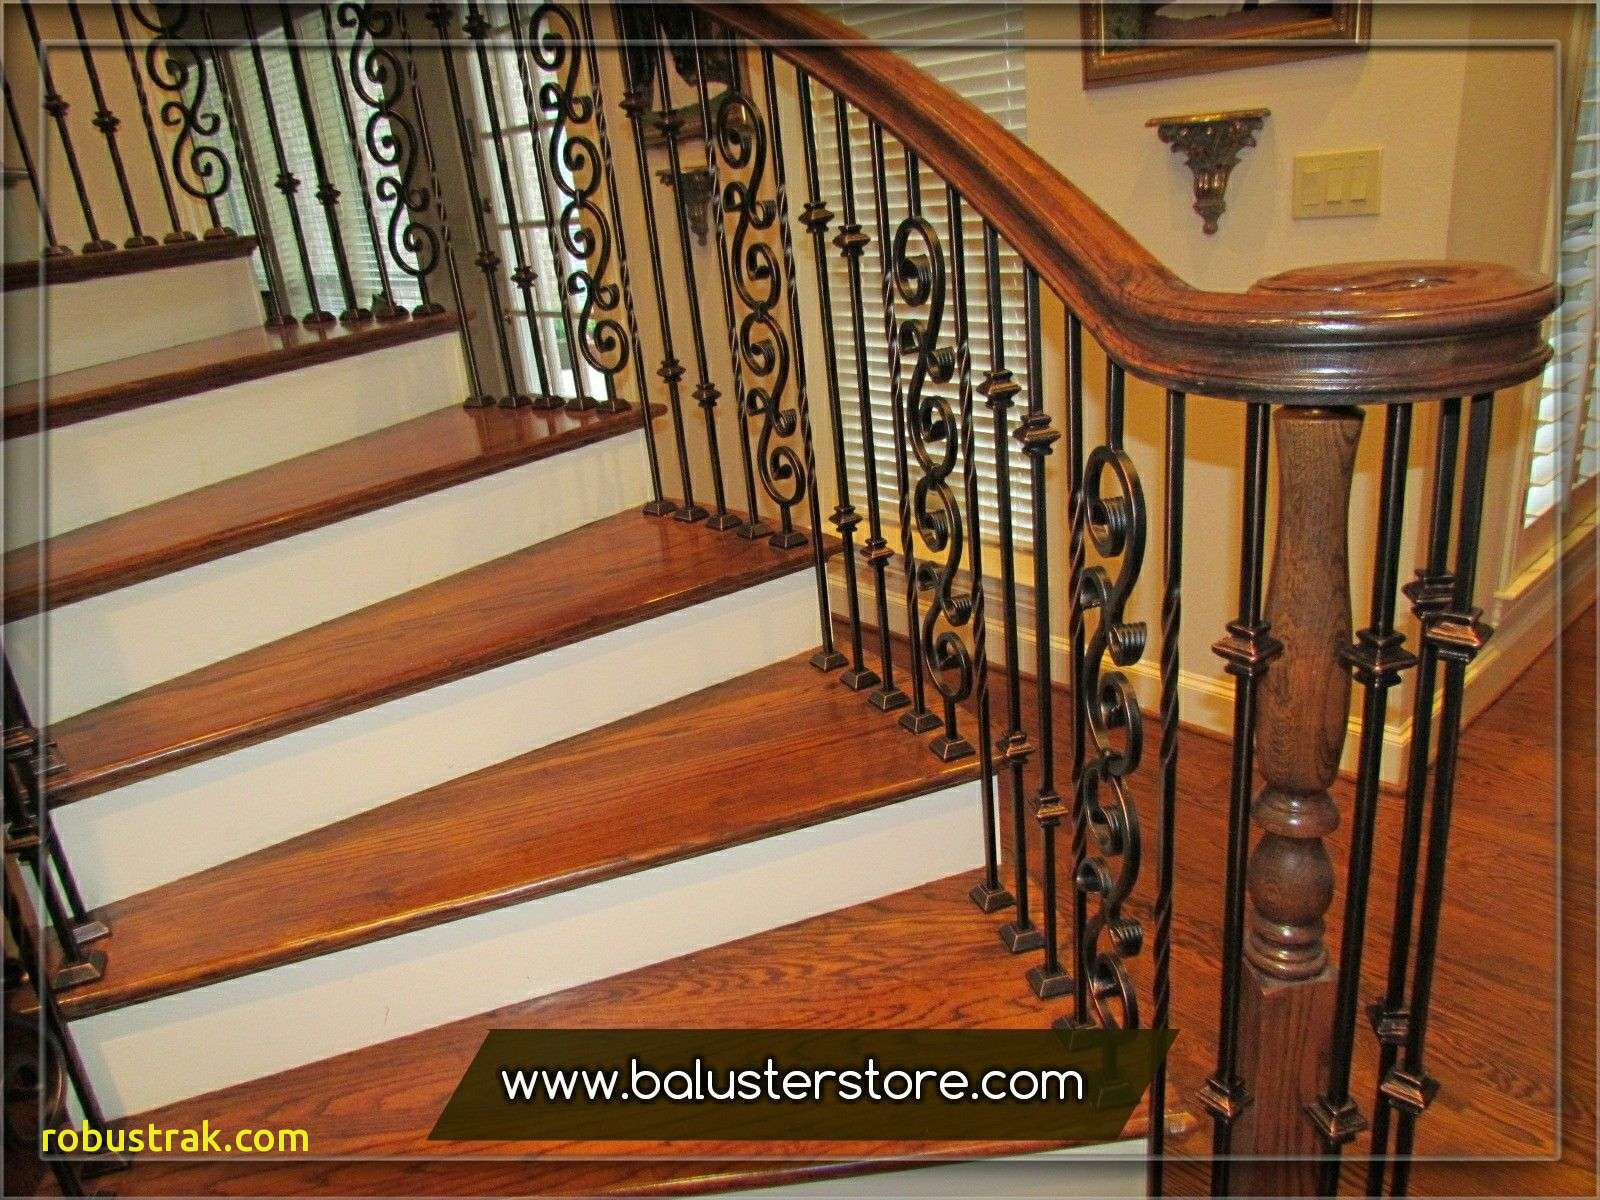 19 Stunning Hardwood Flooring On Stairs Pictures 2024 free download hardwood flooring on stairs pictures of inspirational stair railing ideas home design ideas regarding iron stair balusters parts iron handrails interior stair iron balusters wrought iron sta